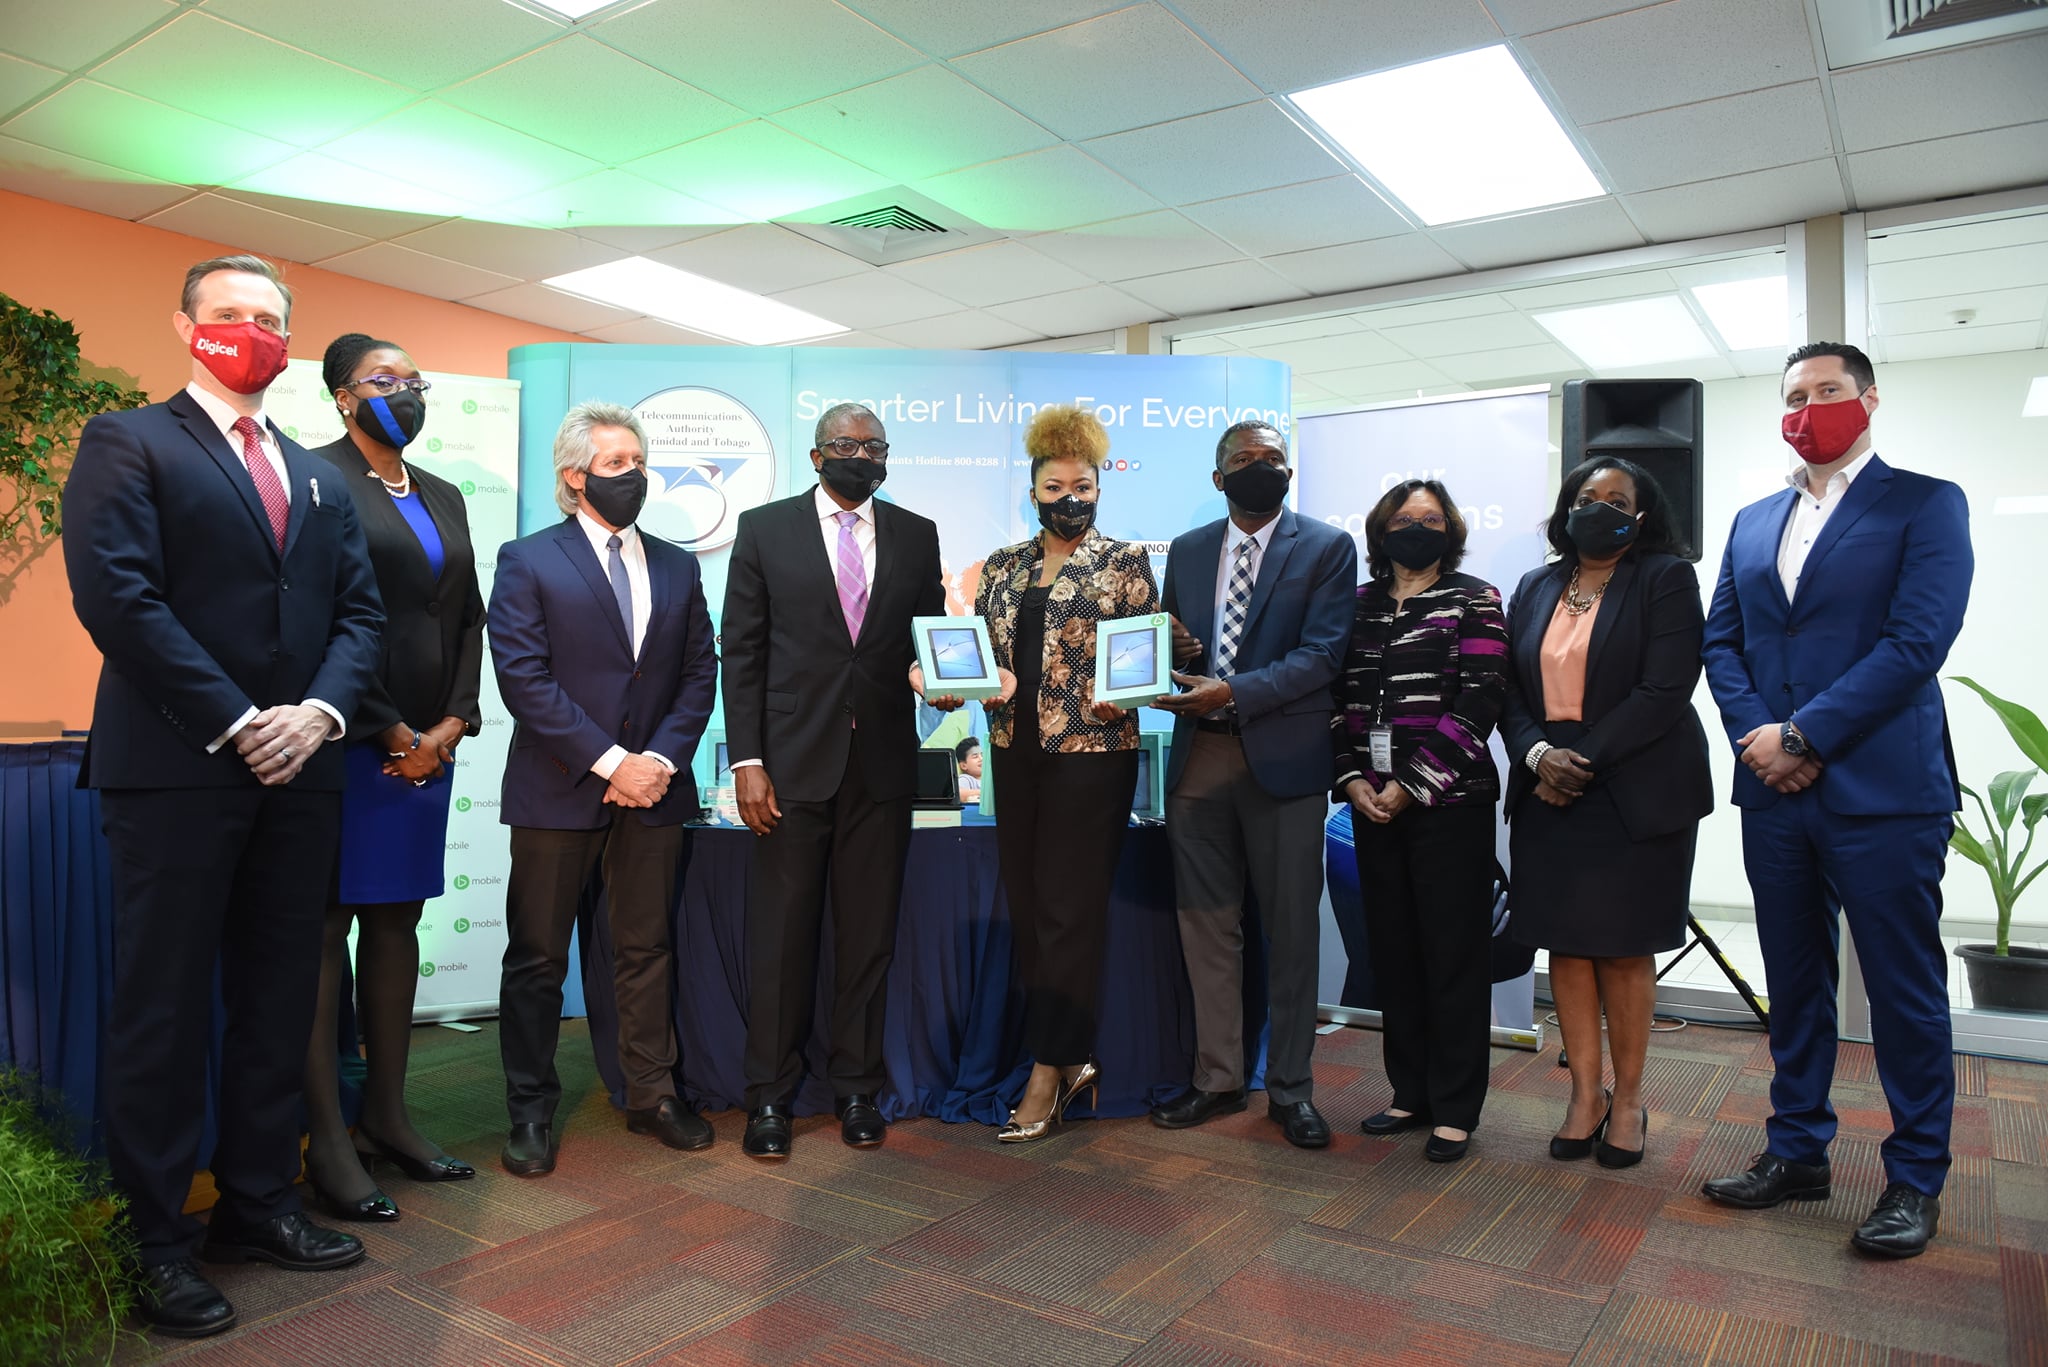 Digicel and TSTT partner to donate 800 devices